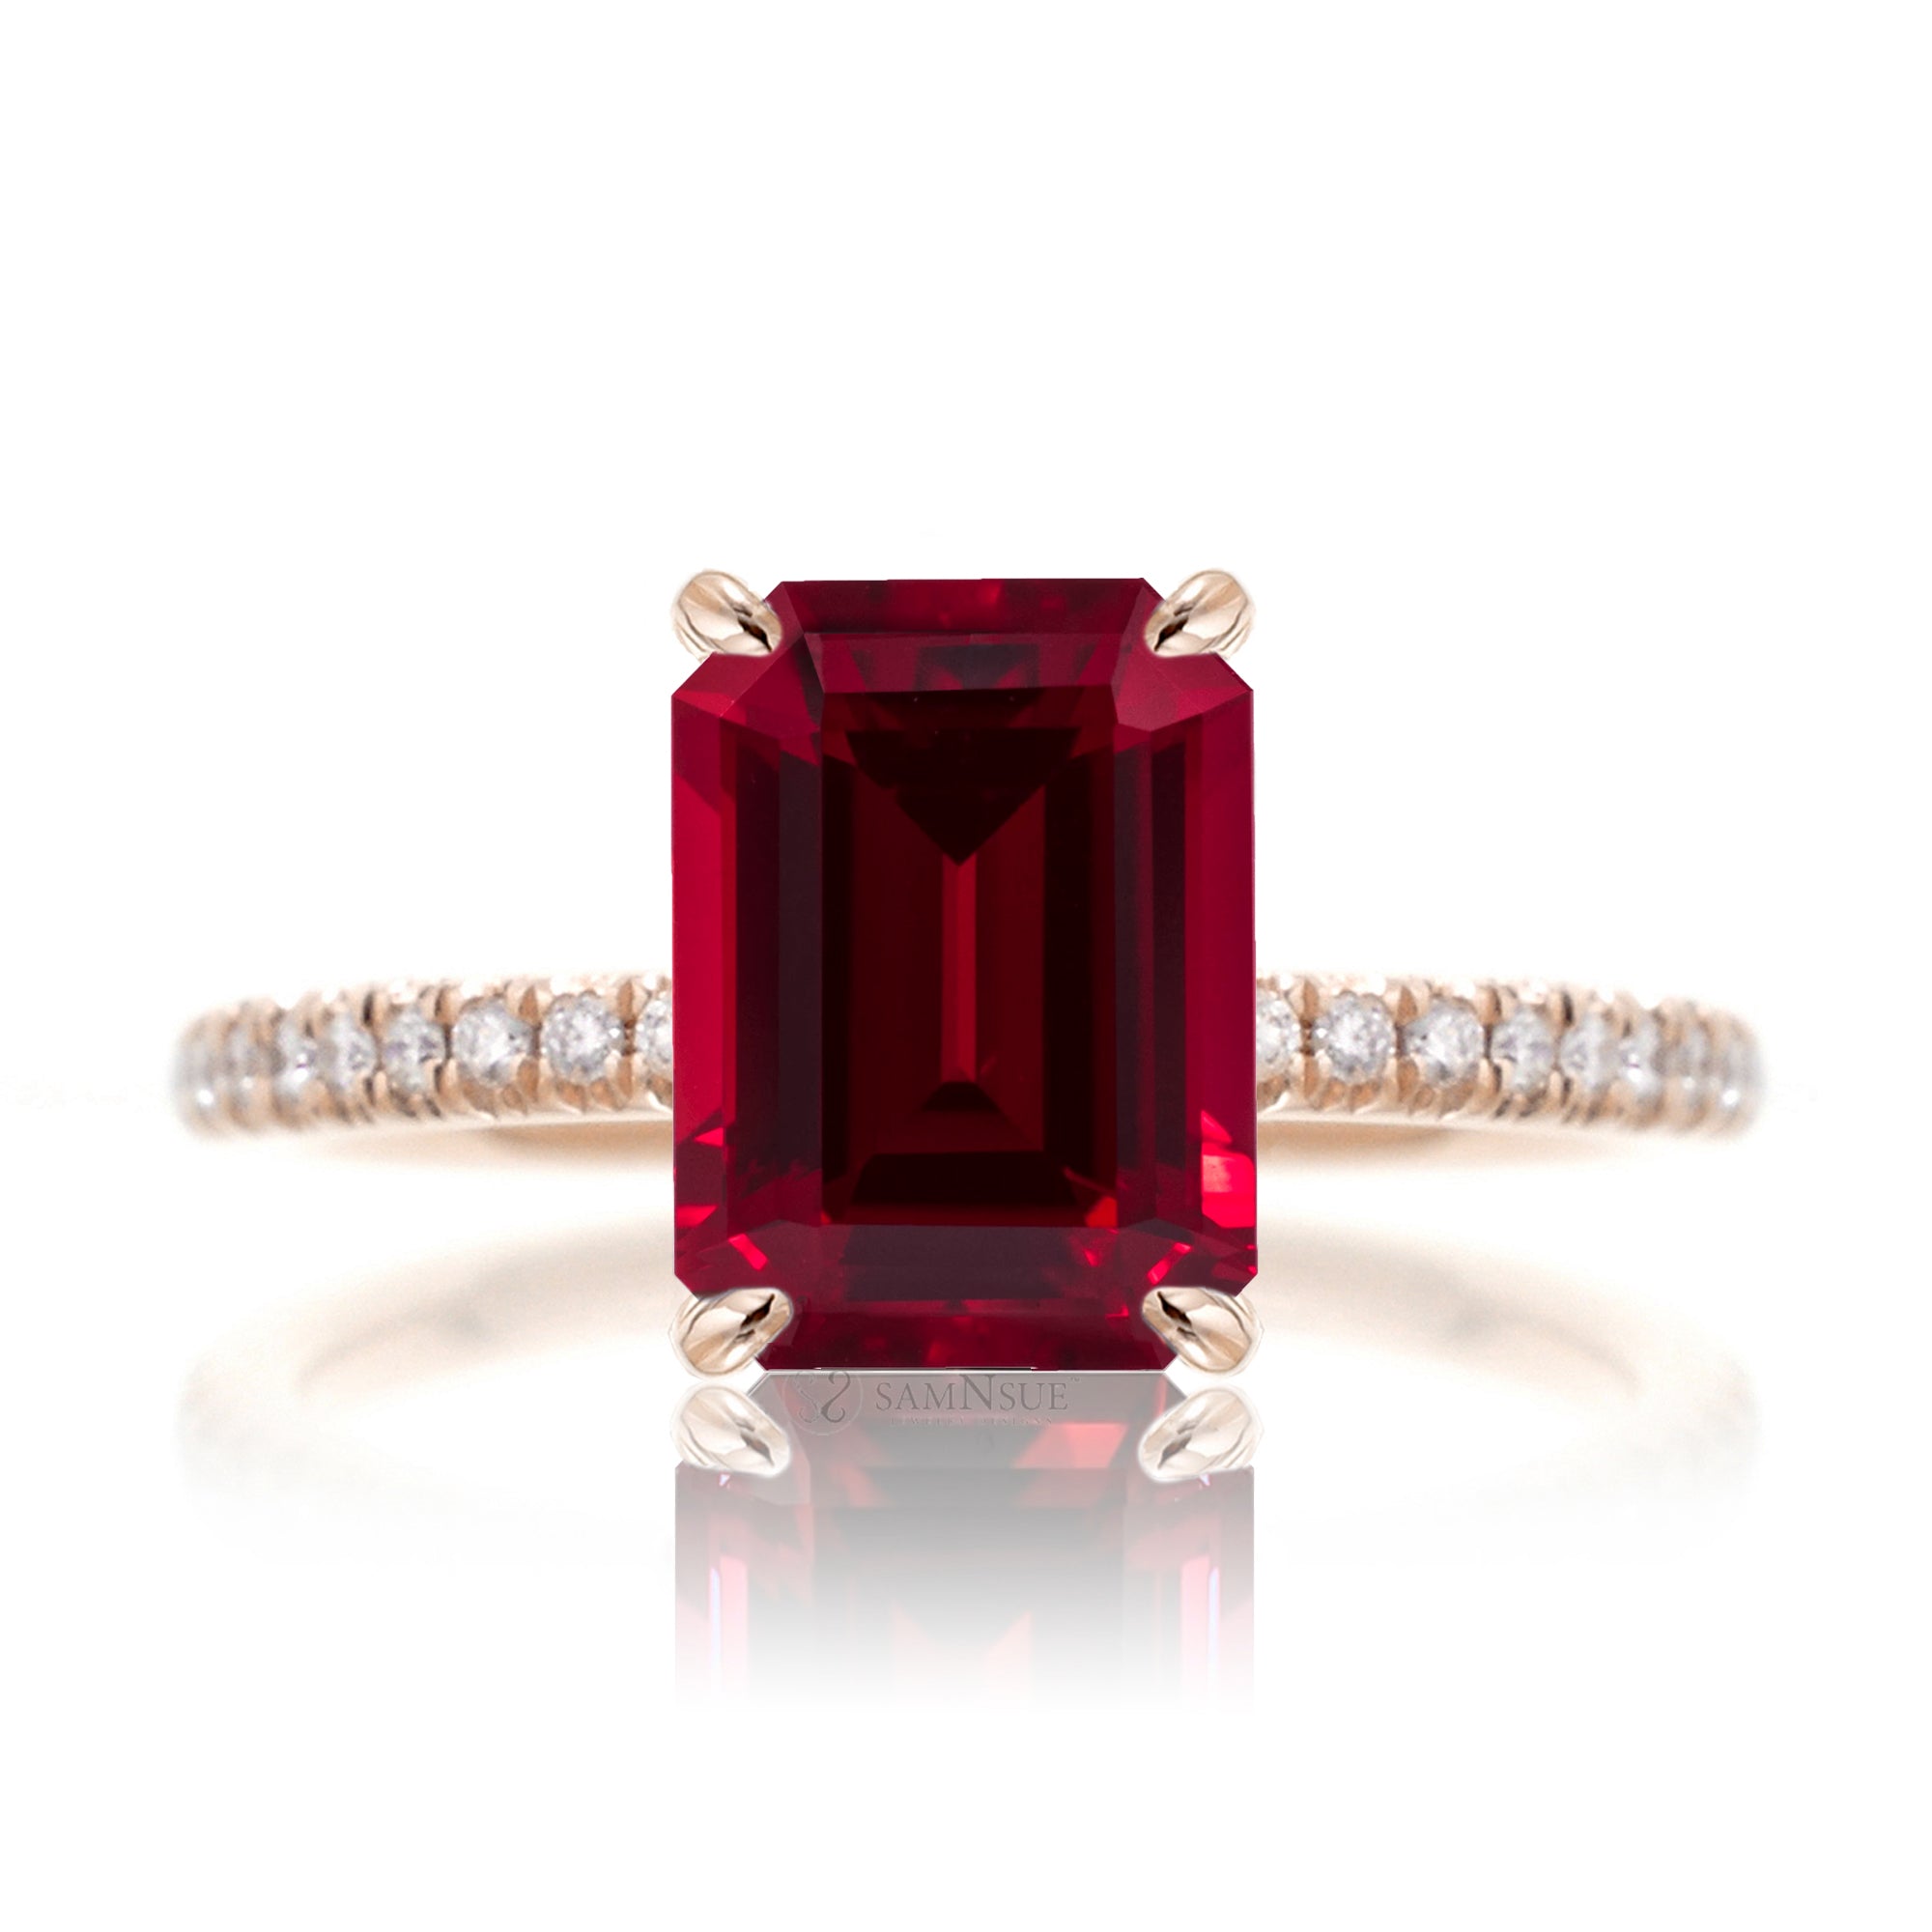 Emerald cut ruby diamond engagement ring rose gold - the Ava